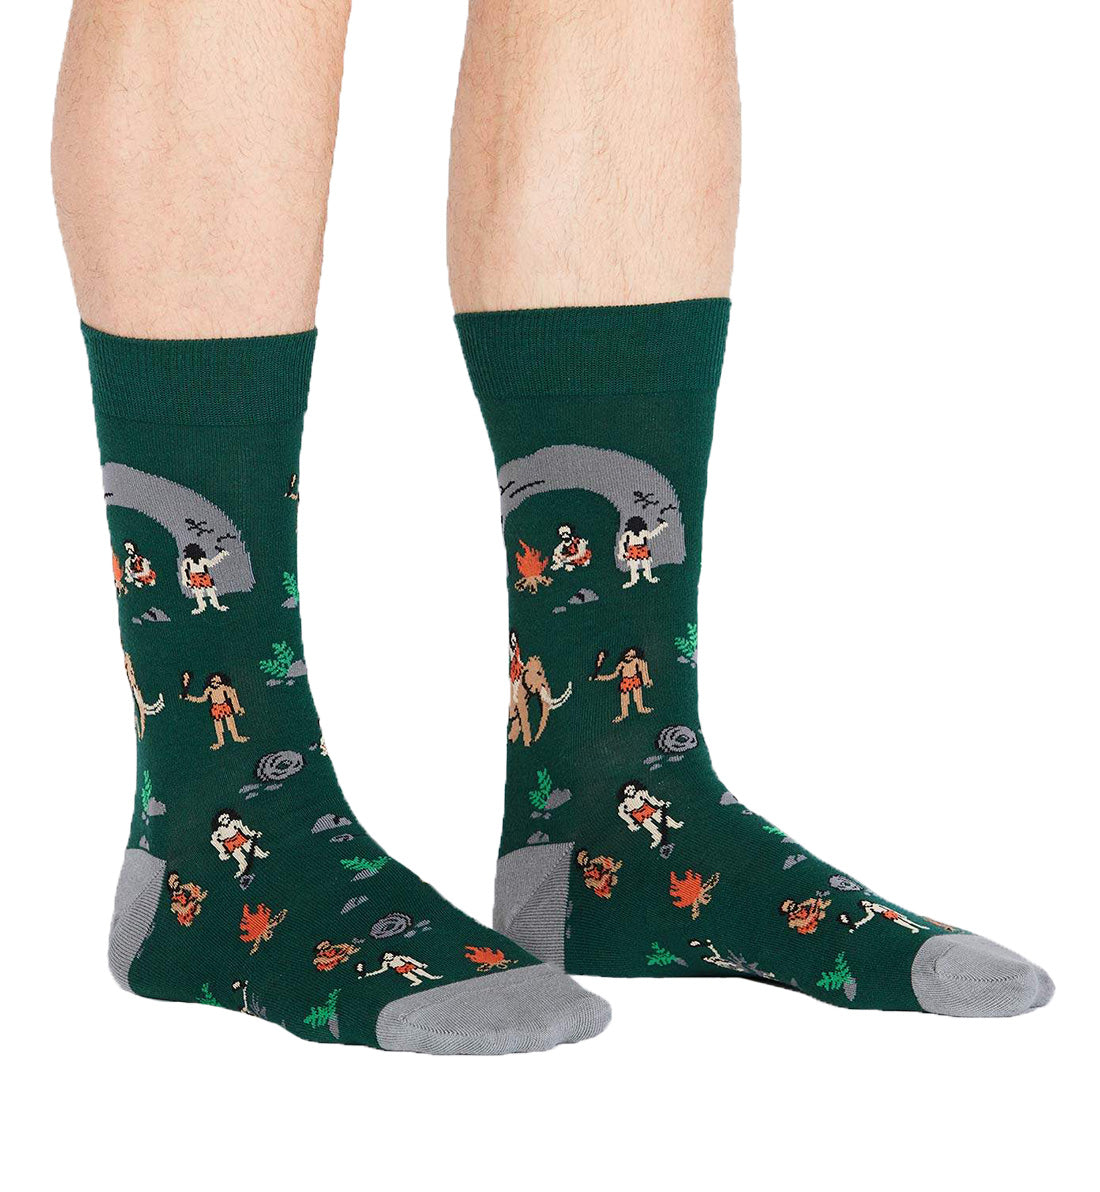 SOCK it to me Men's Crew Socks (mef0323),Man Cave - Man Cave,One Size